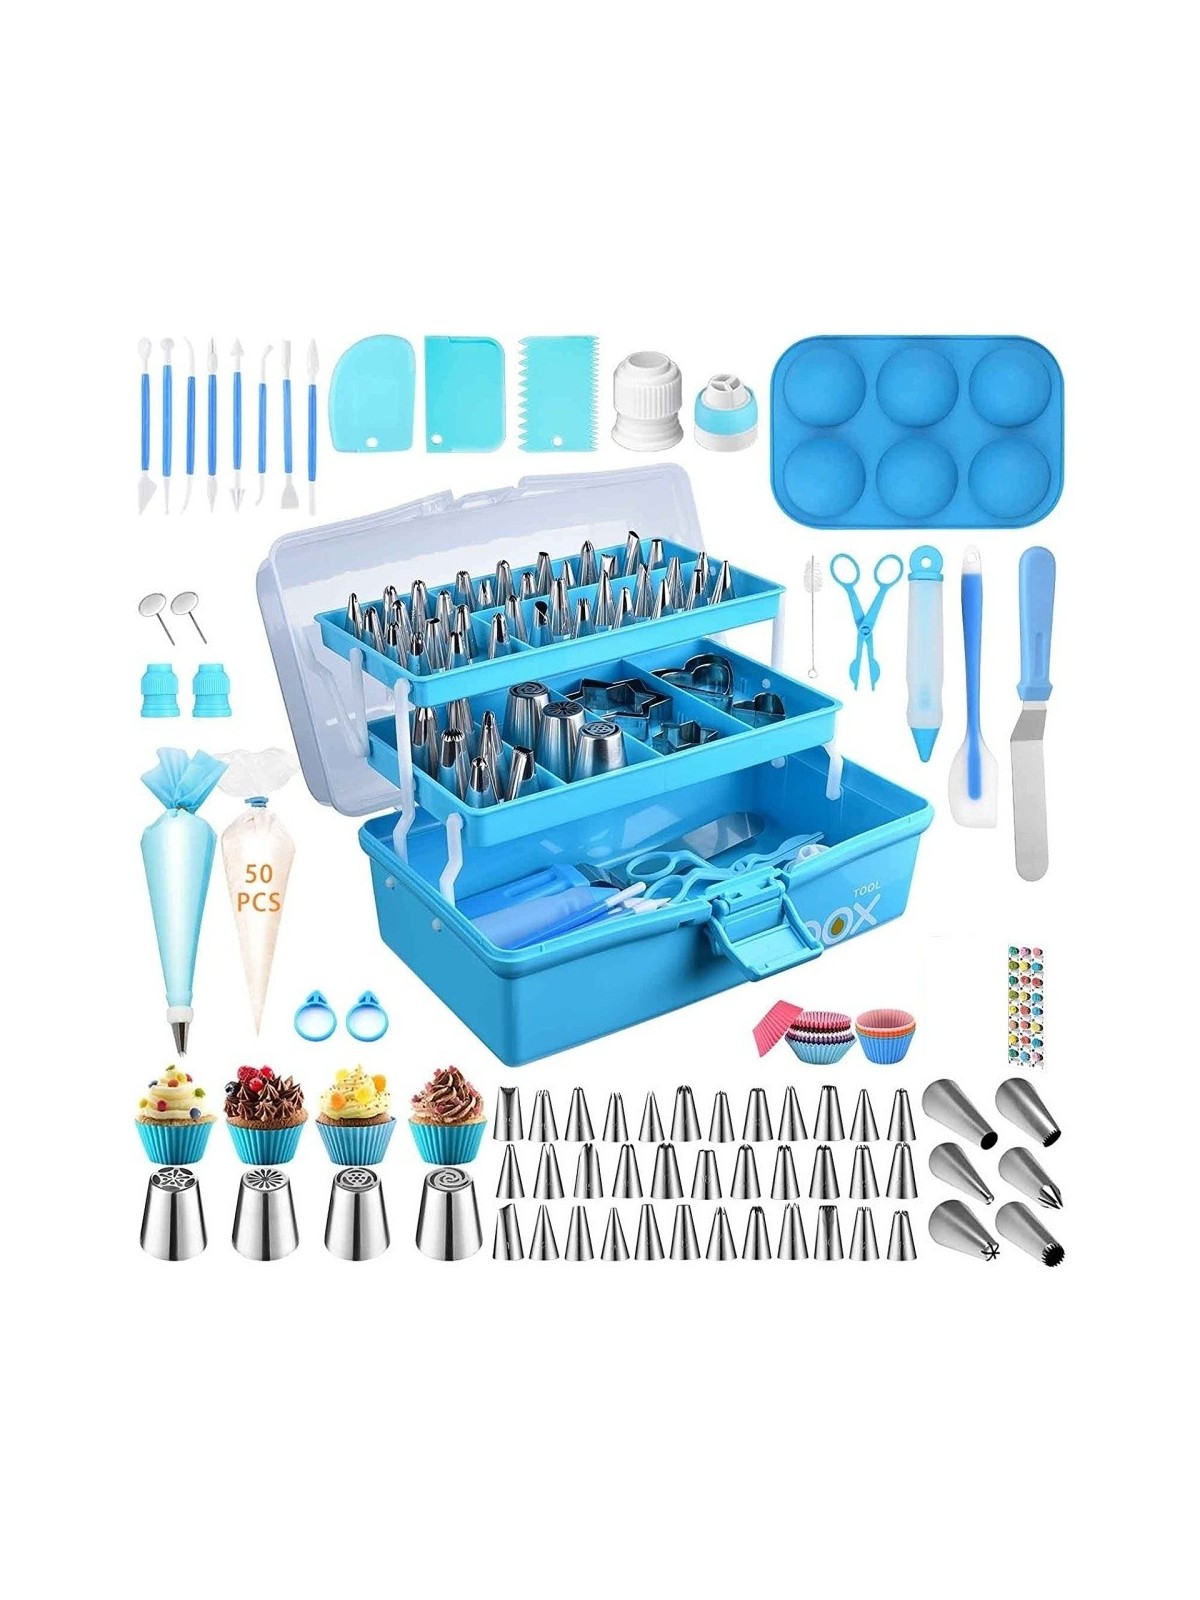 Large set for decorating in a briefcase - 236pcs